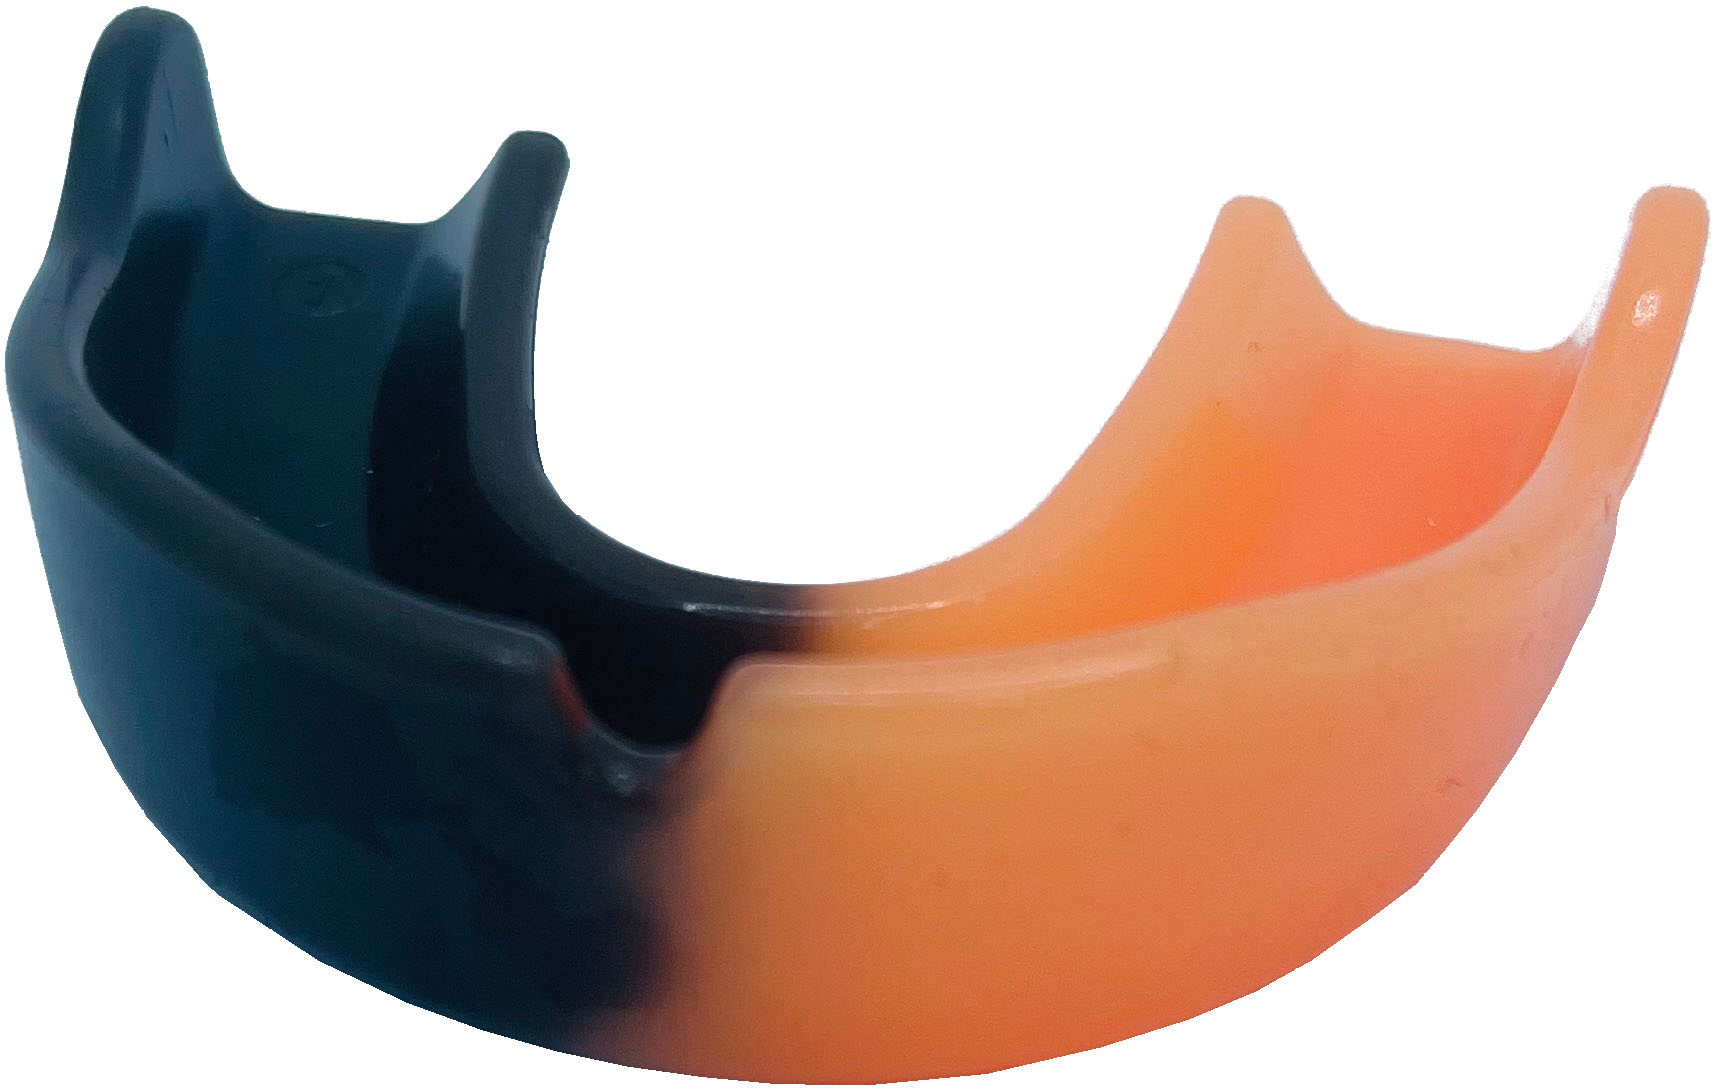 Buy The Best Football Mouthpieces